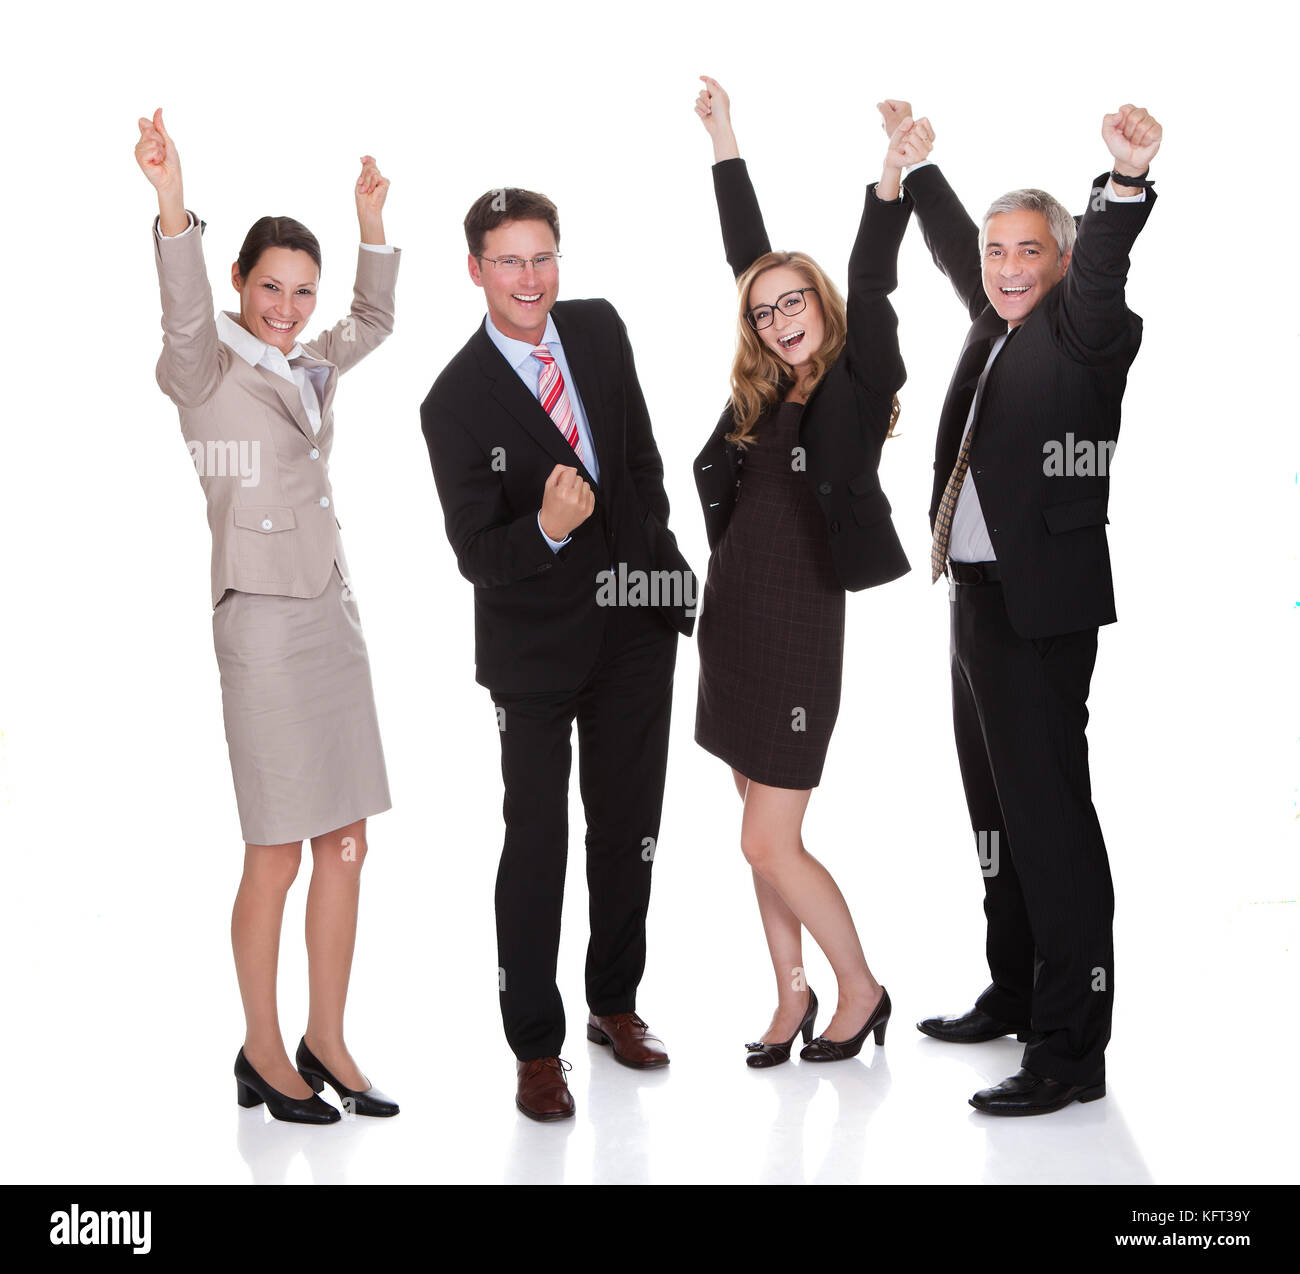 Four excited diverse professional businesspeople celebrating a success laughing and raising their arms in the air isolated on white Stock Photo